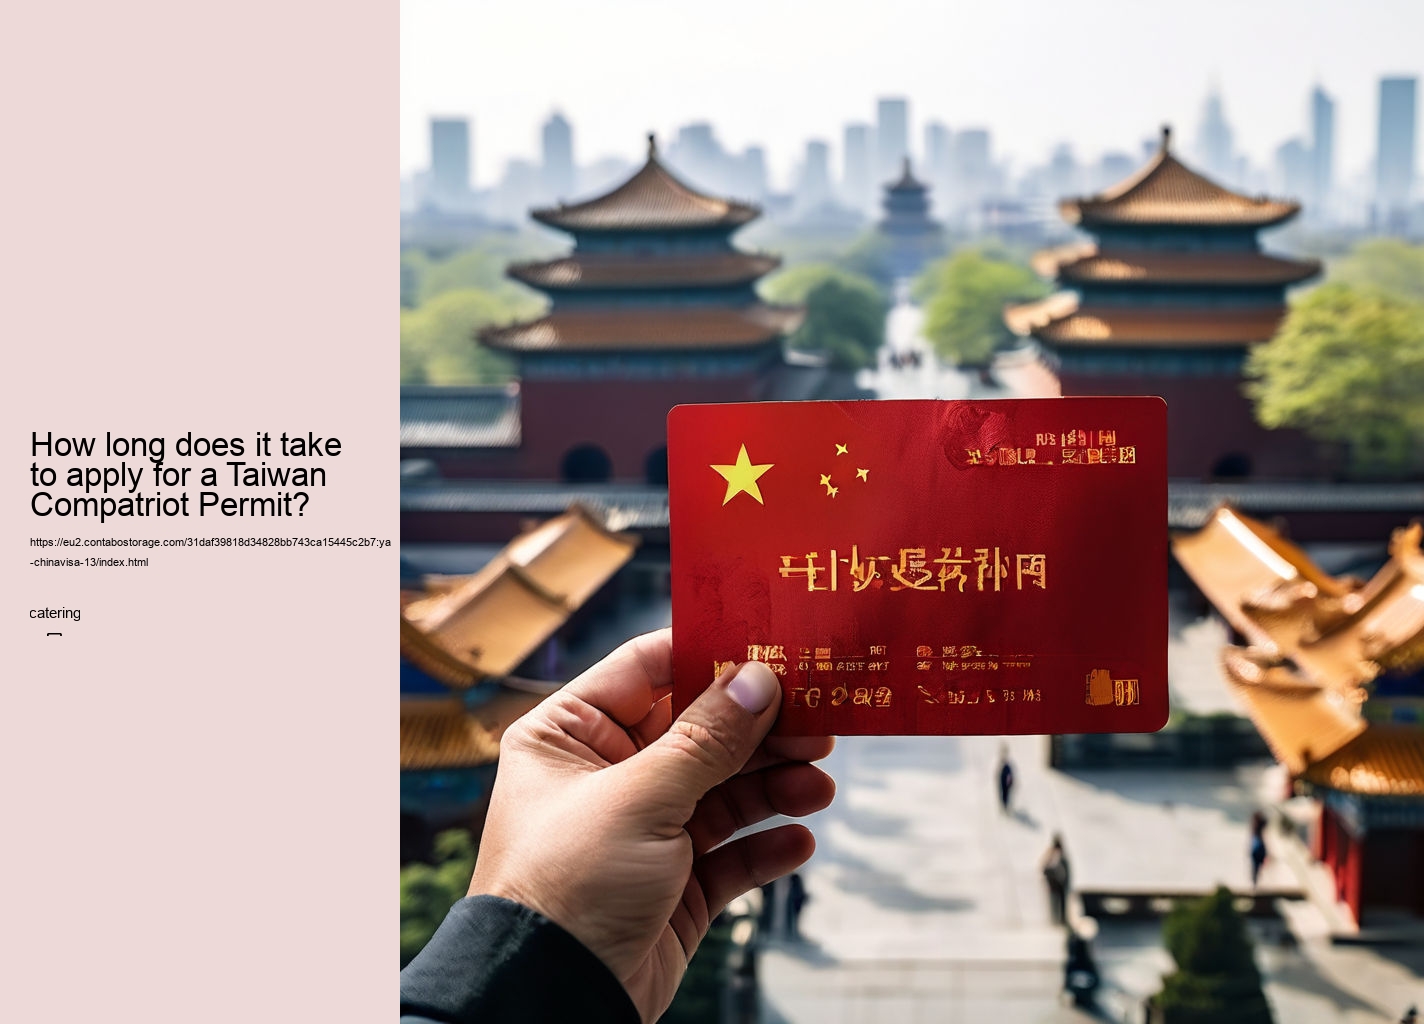 How long does it take to apply for a Taiwan Compatriot Permit?